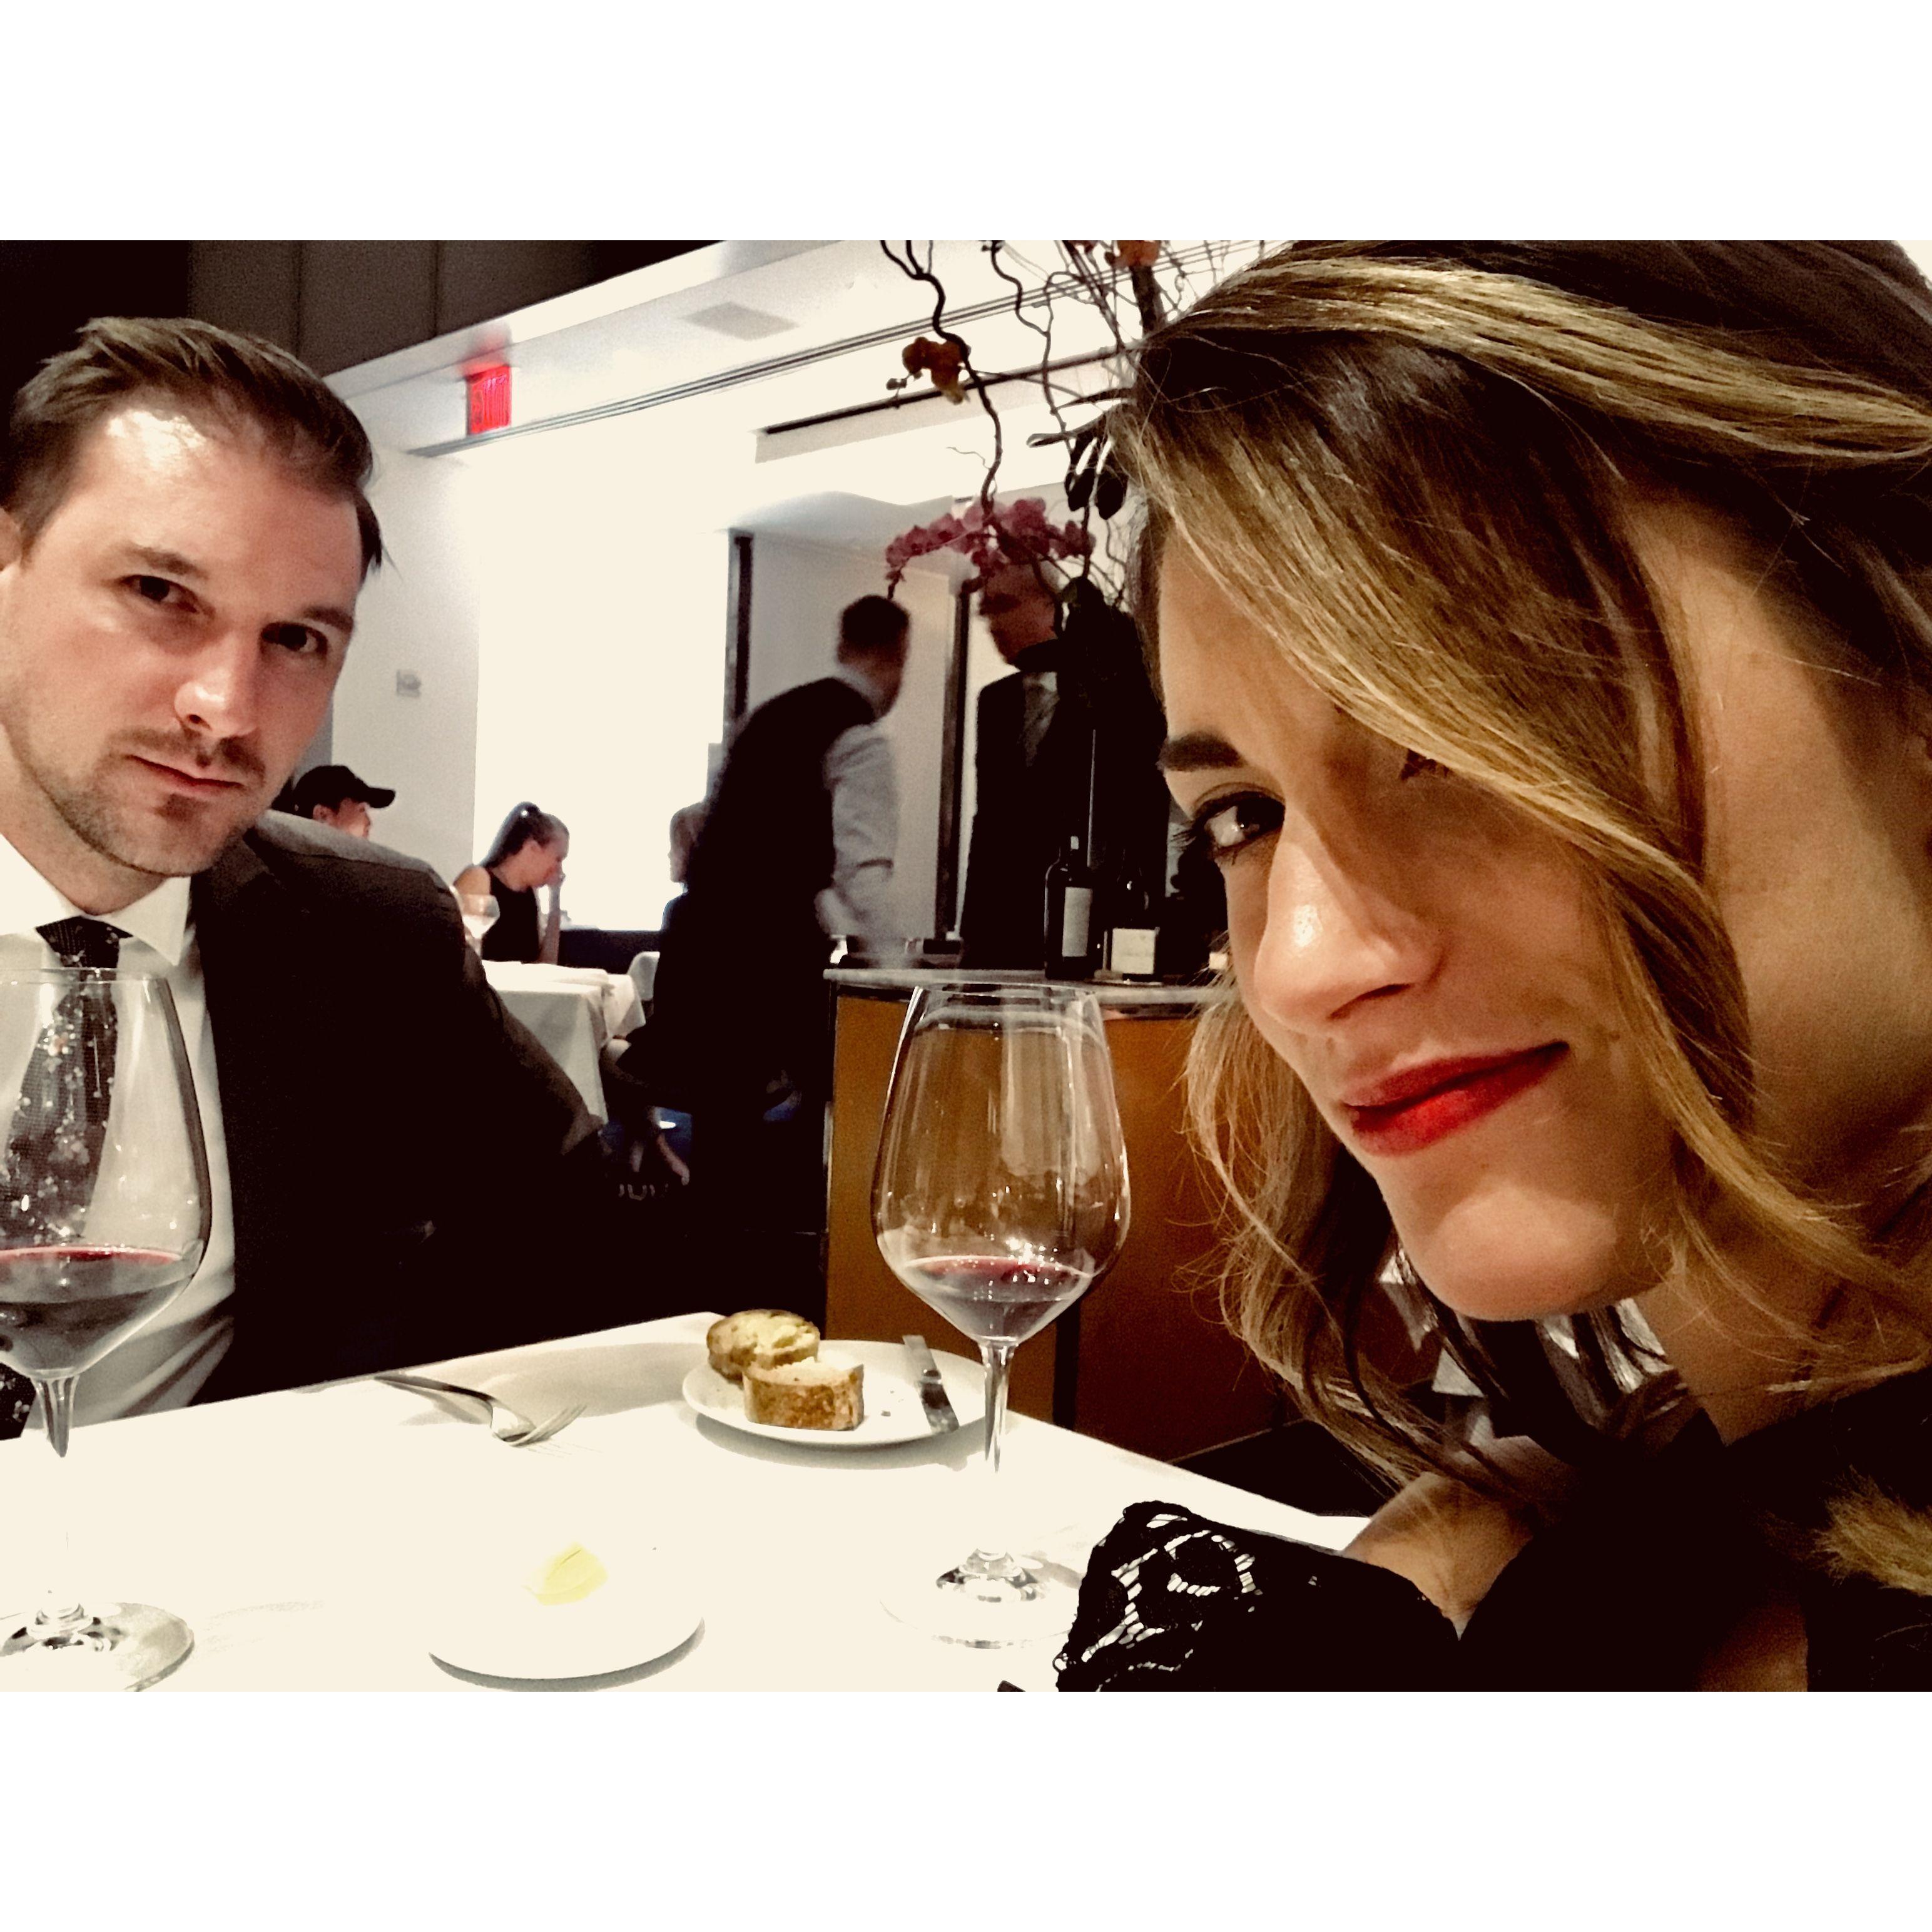 Our Michelin restaurant experience at The Modern in NYC. These are our fancy faces.